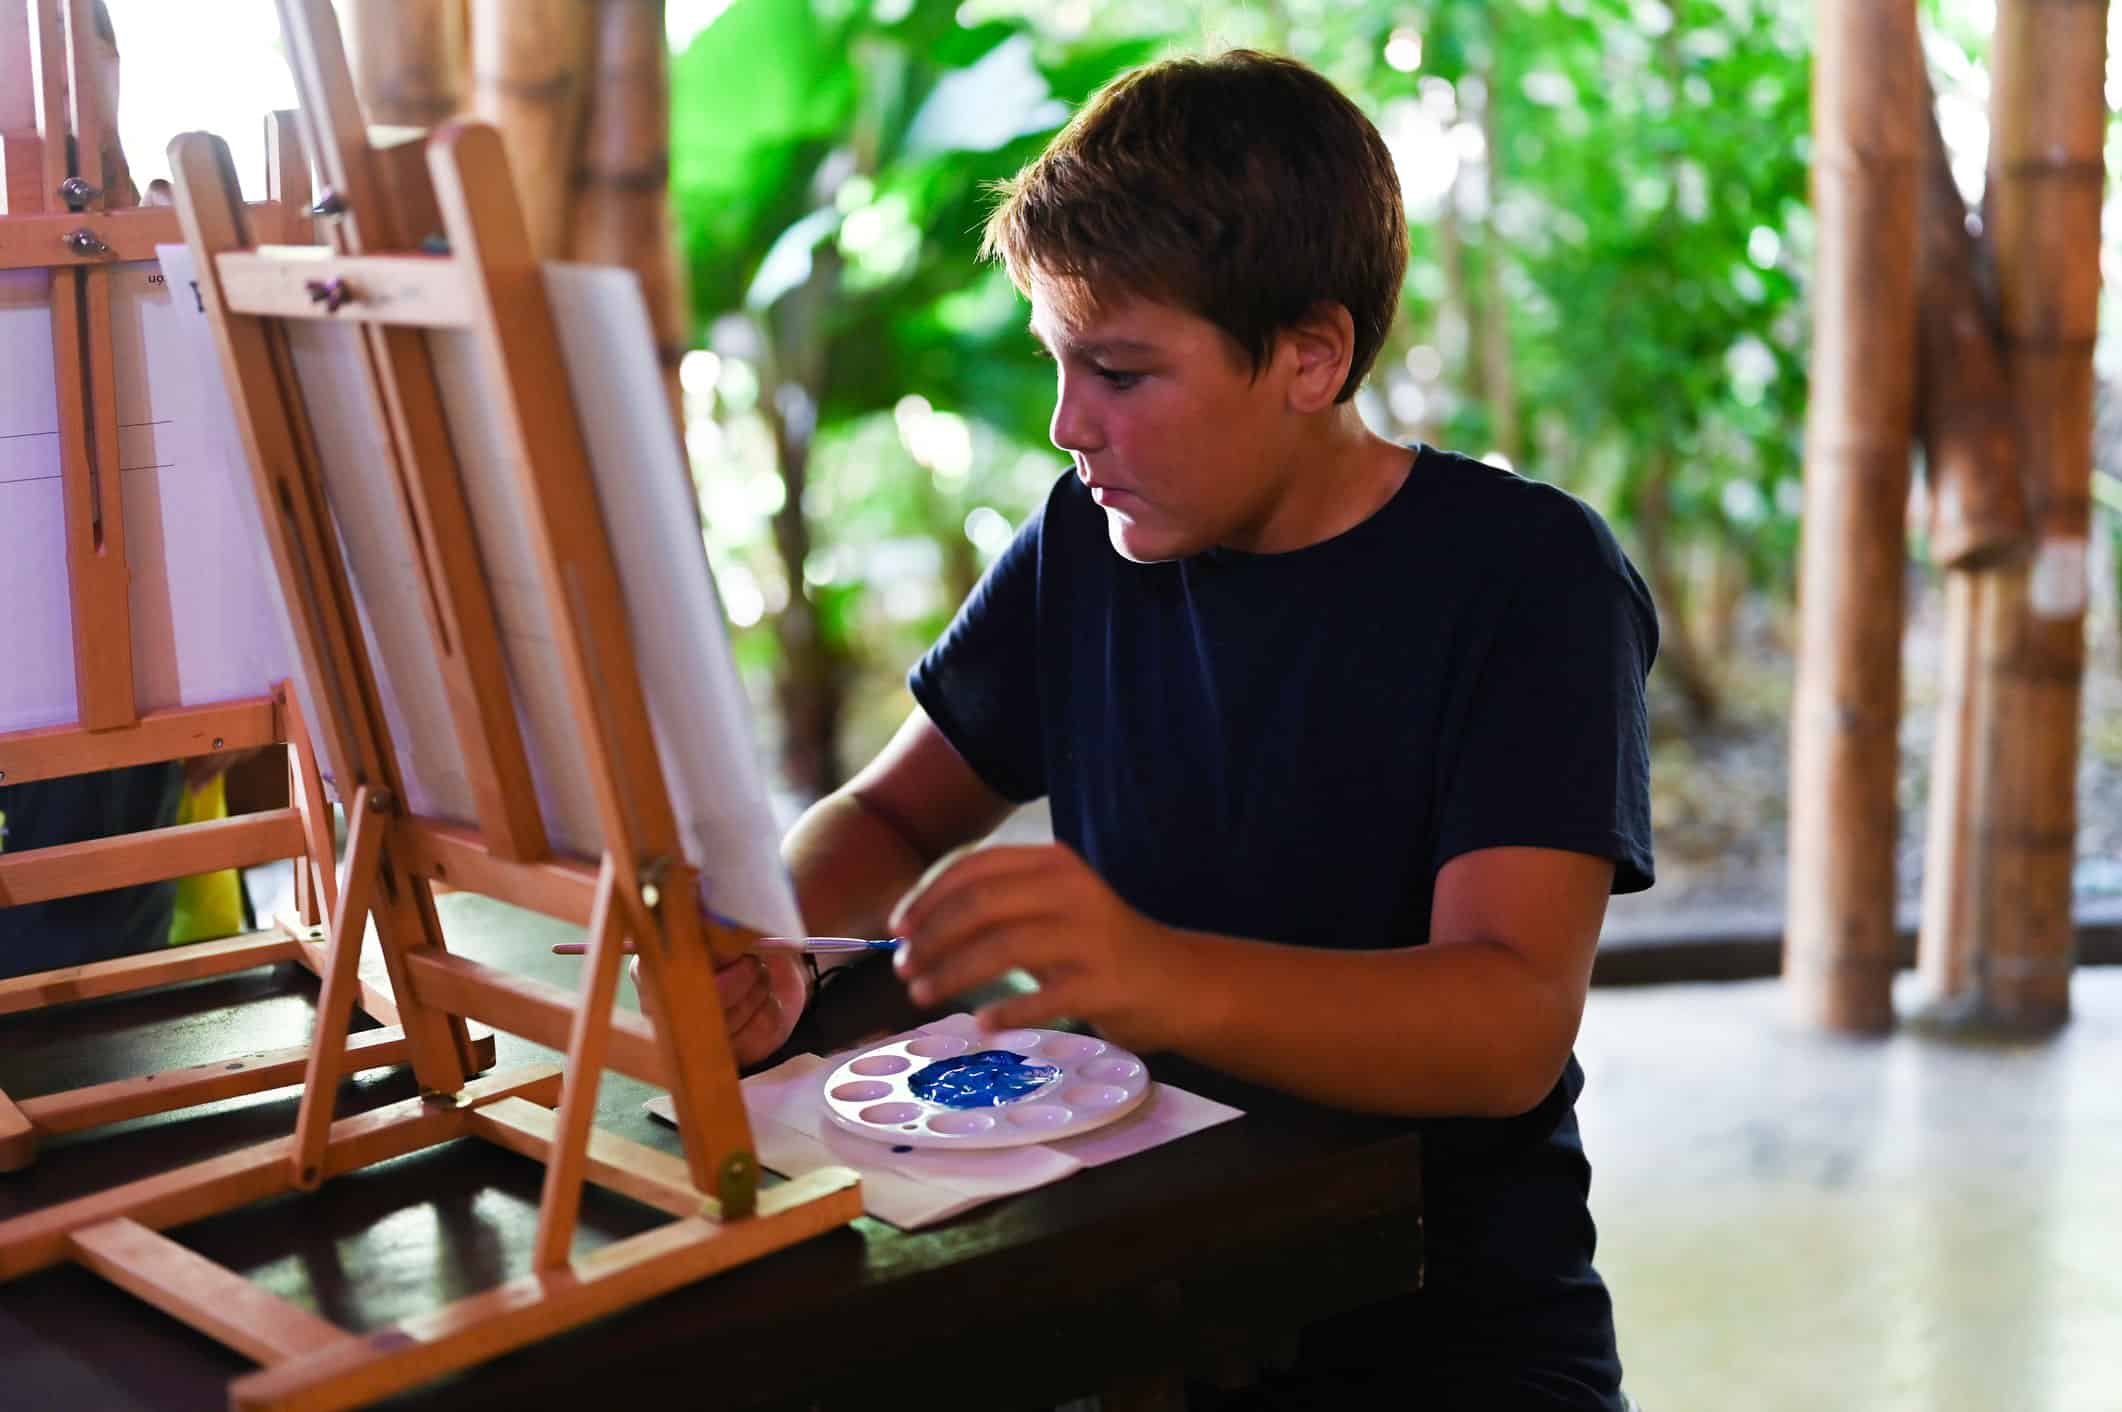 student painting with blue paint on a canvas